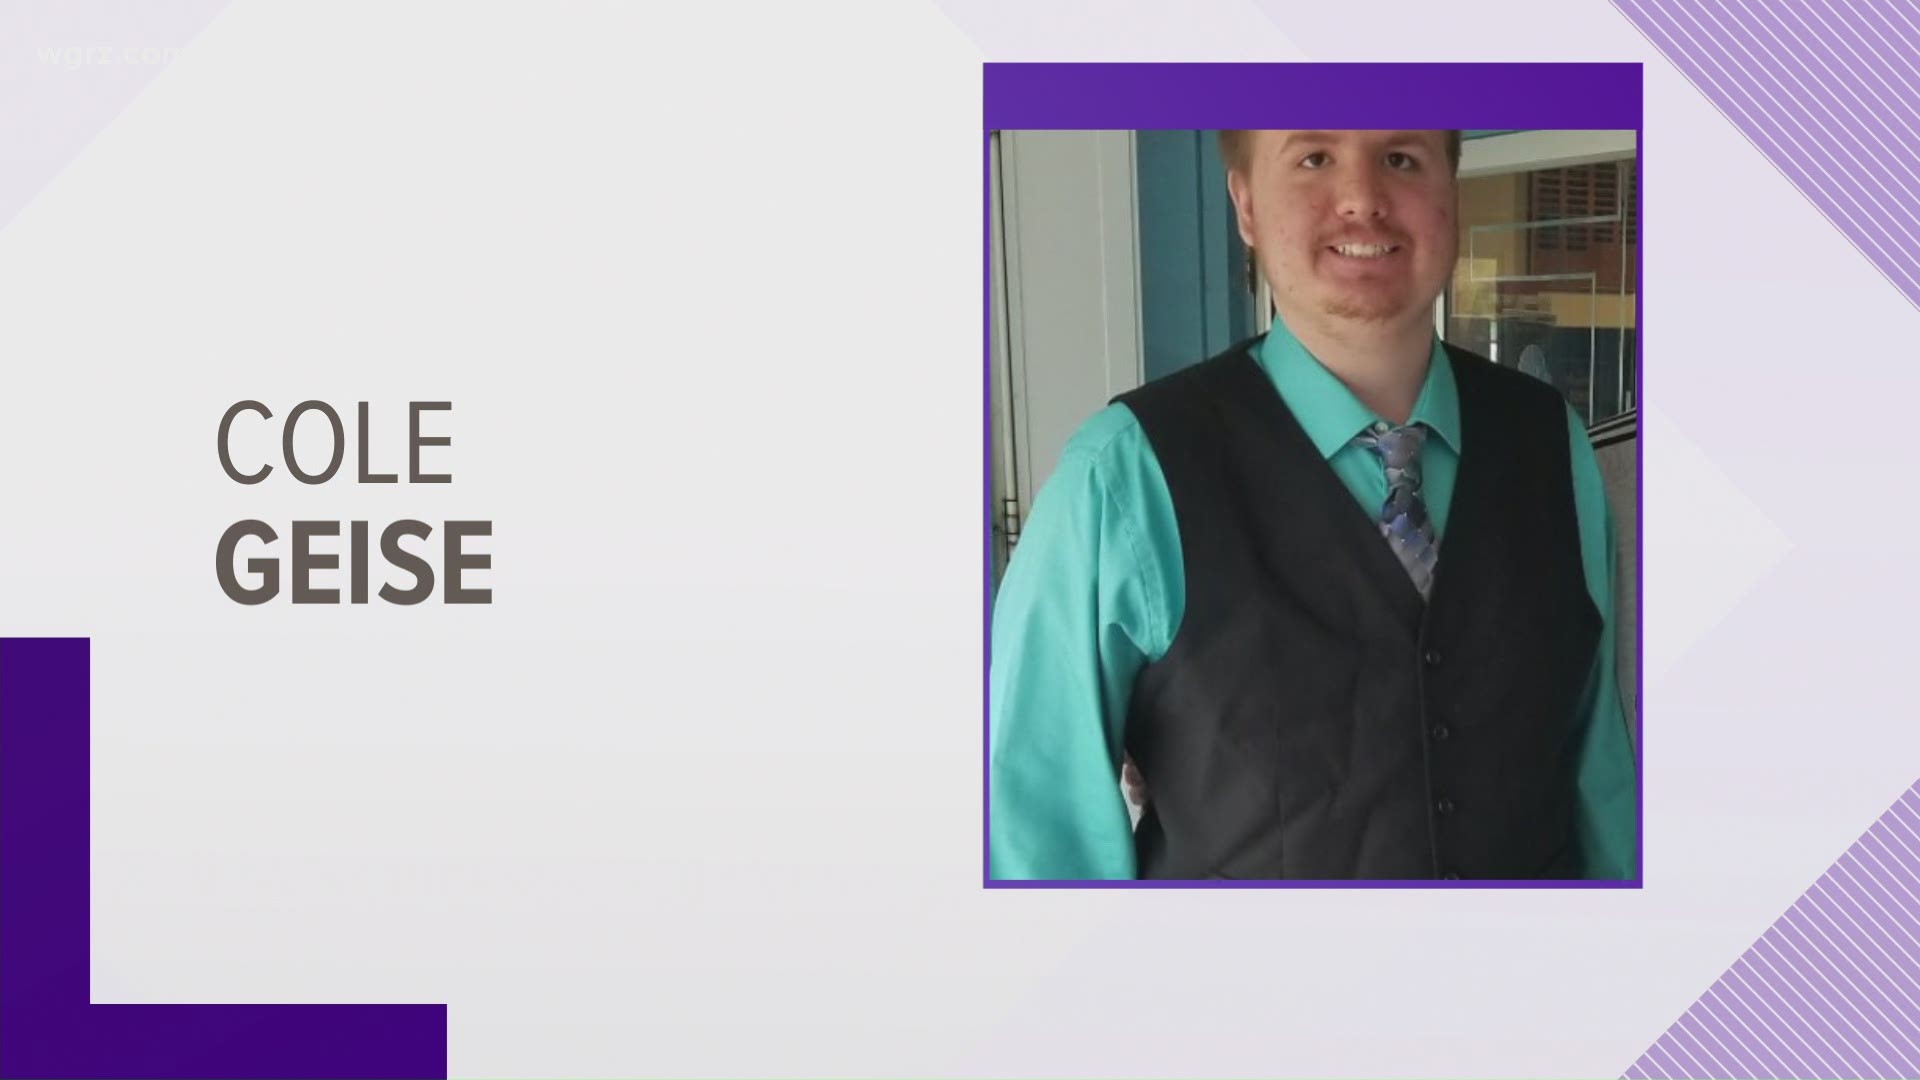 21-year-old Cole Geise has autism... and has not been seen since 10 o'clock last night.